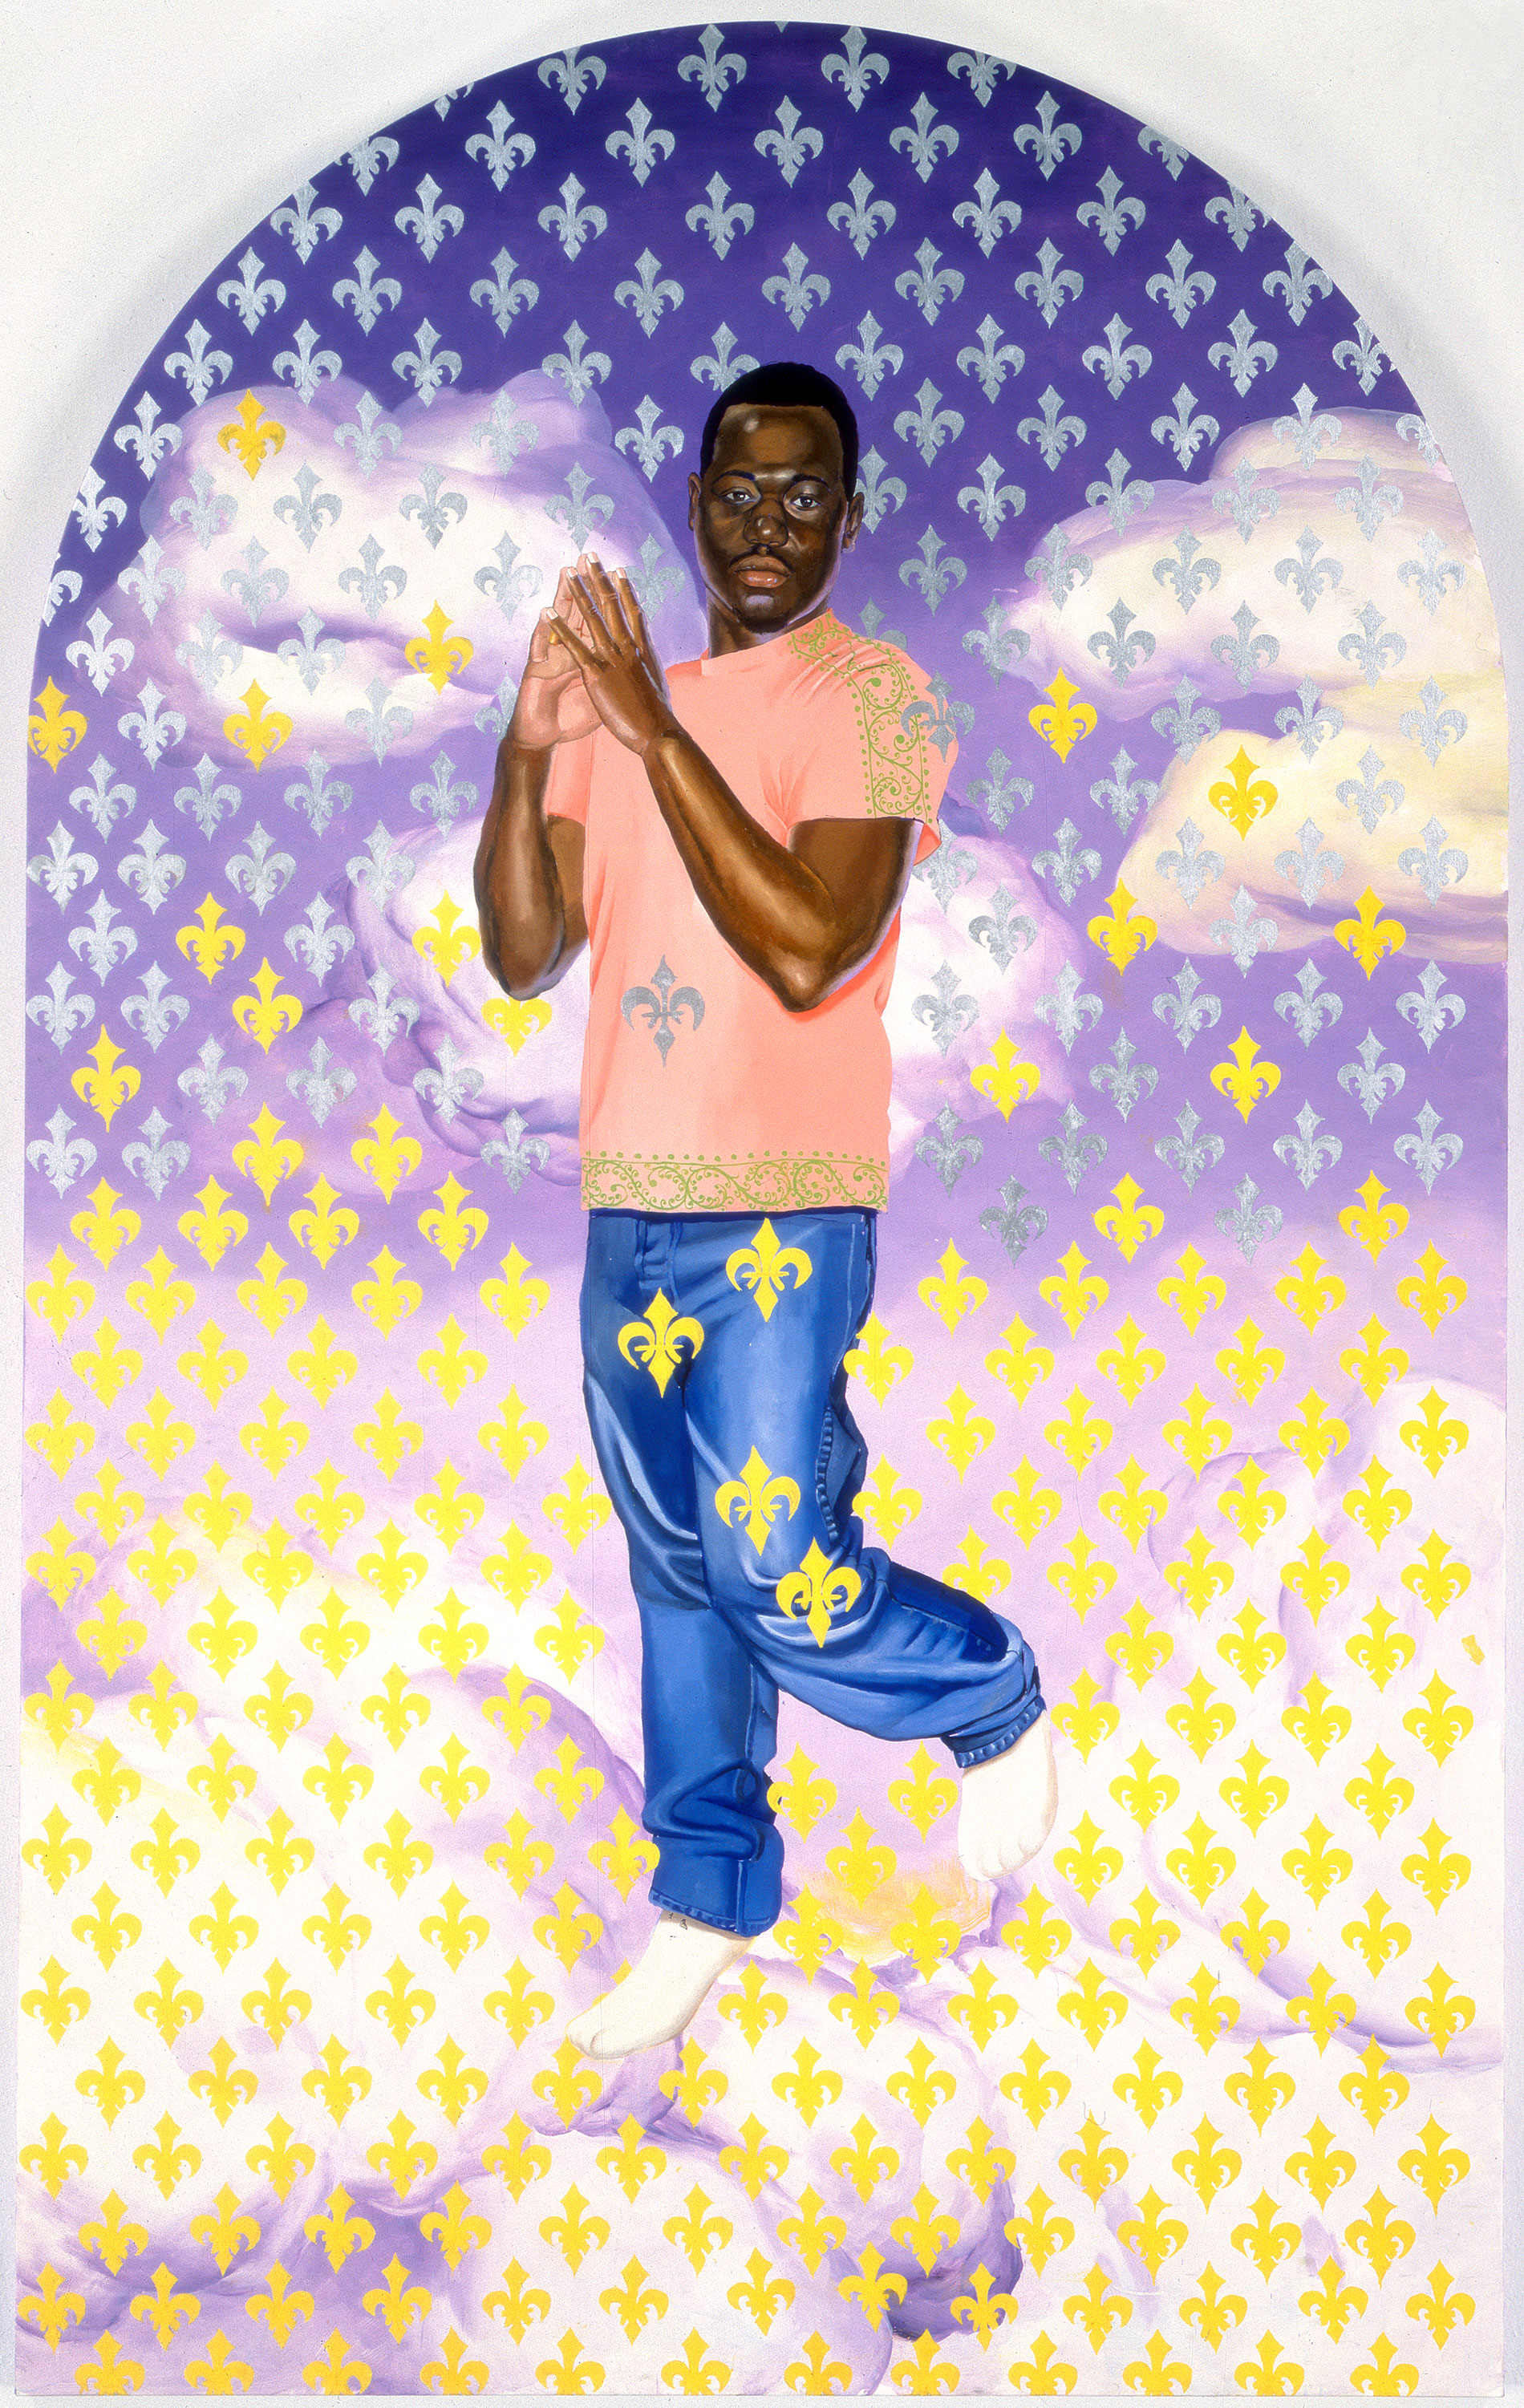 Kehinde Wiley | Passing / Posing  | Immaculate Consumption, 2003 Oil on Canvas Mounted on Panel.  | 7